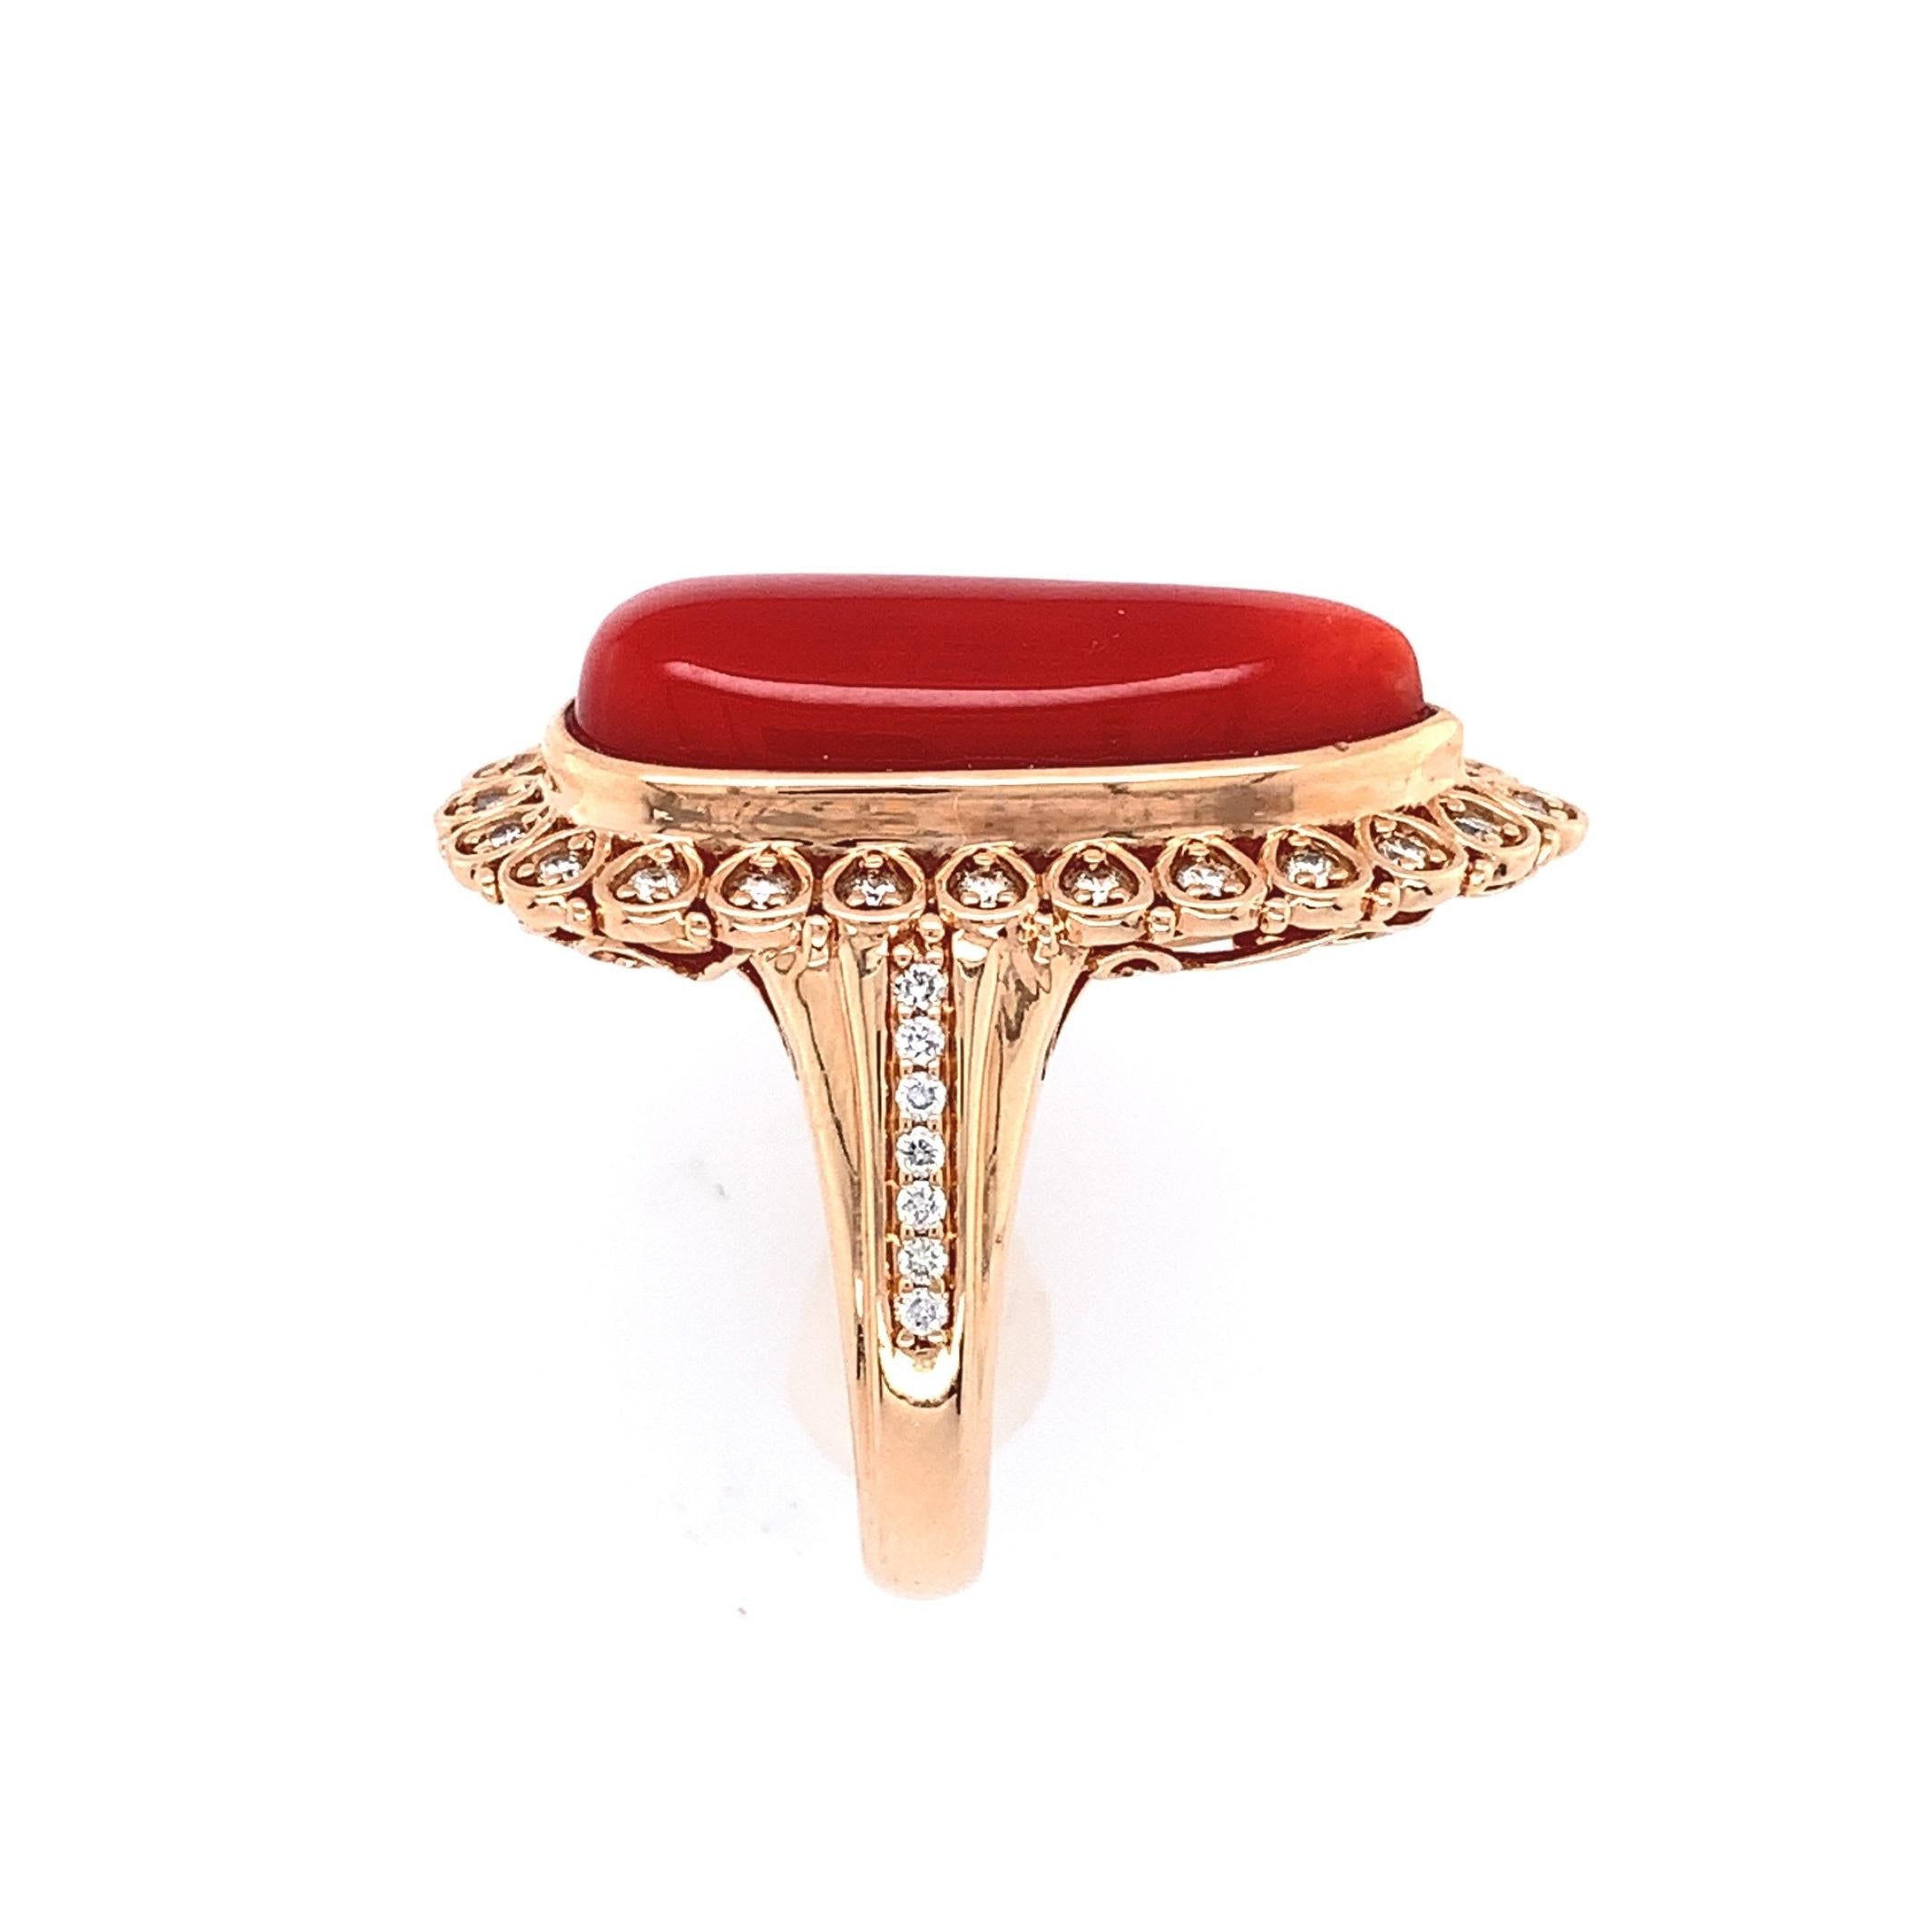 New 18K rose gold natural orange-red coral and diamond ring. The long pear shape cabochon coral weighs 12.05 carats and measures about 21mm x 8mm. Surrounding it are 24 round brilliant cut diamonds in the halo and and 14 round  diamond accents on